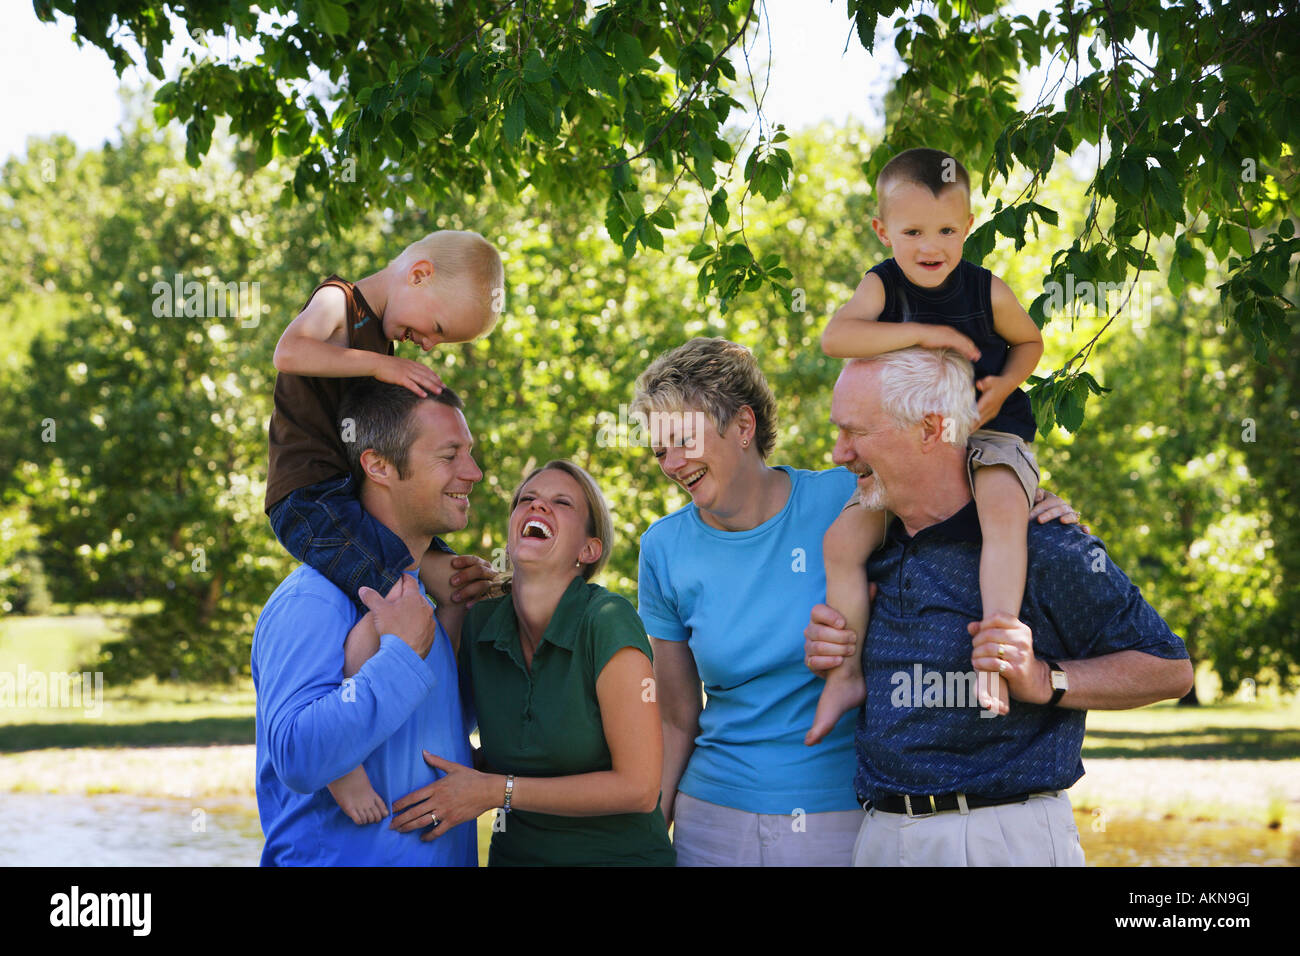 Family having fun together Stock Photo